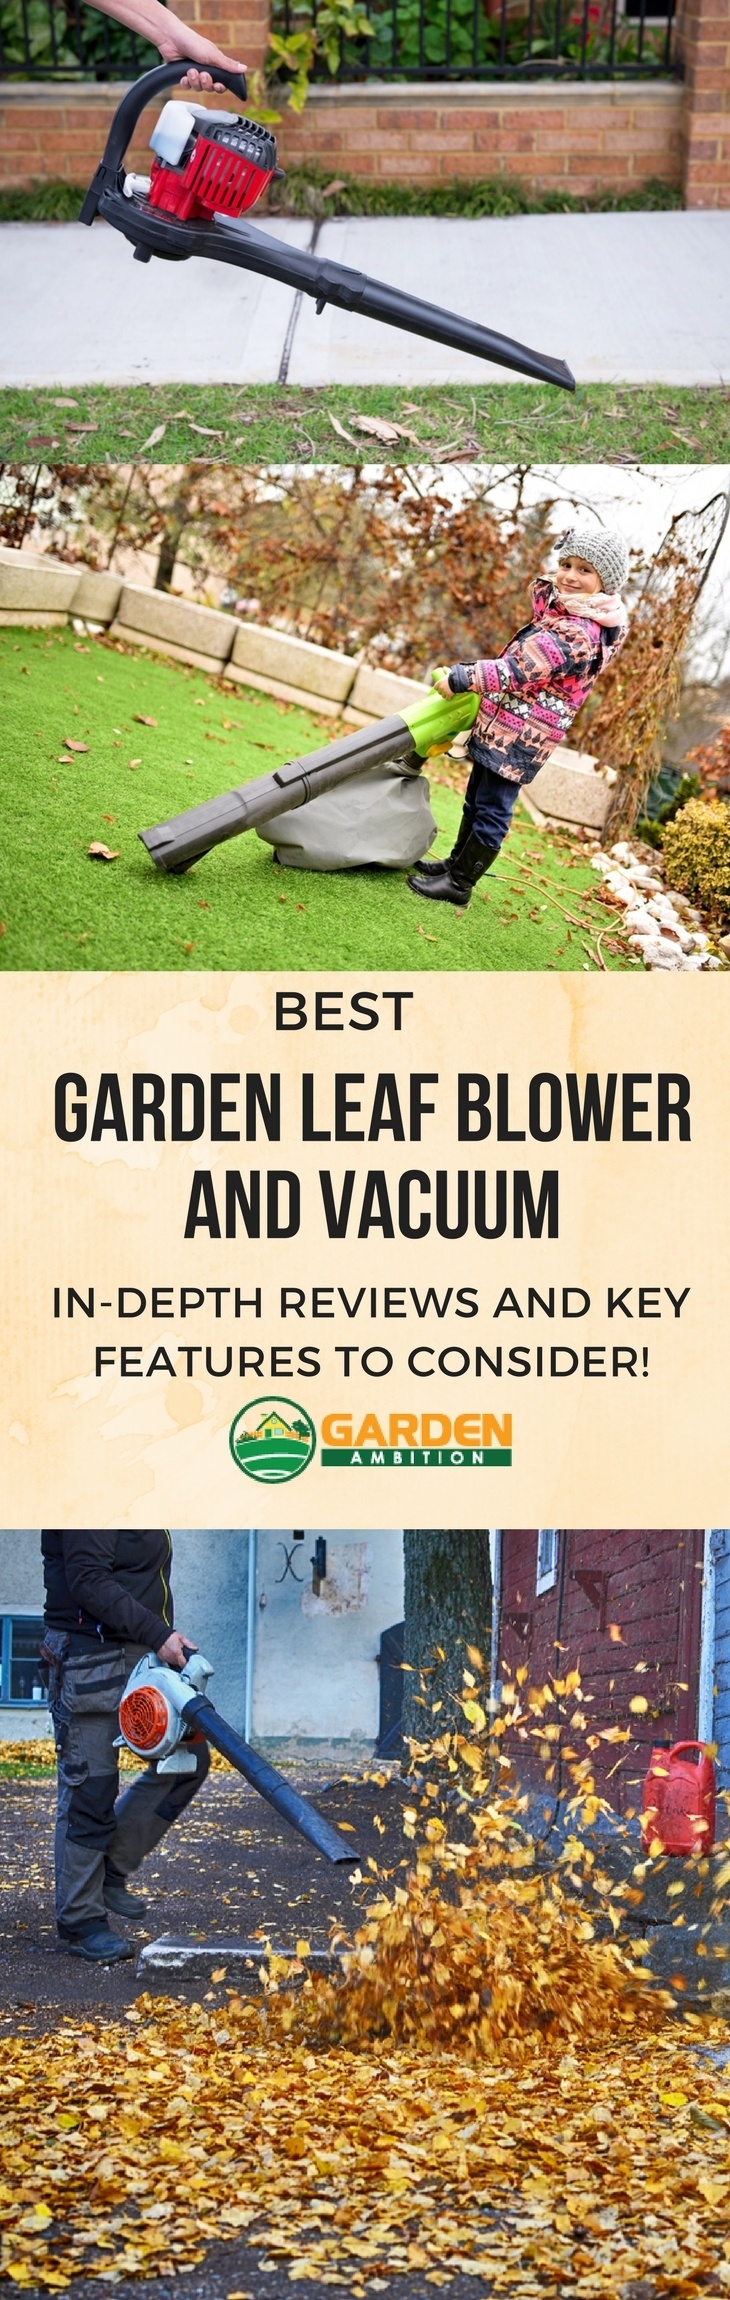 best garden leaf blower and vacuum pin it